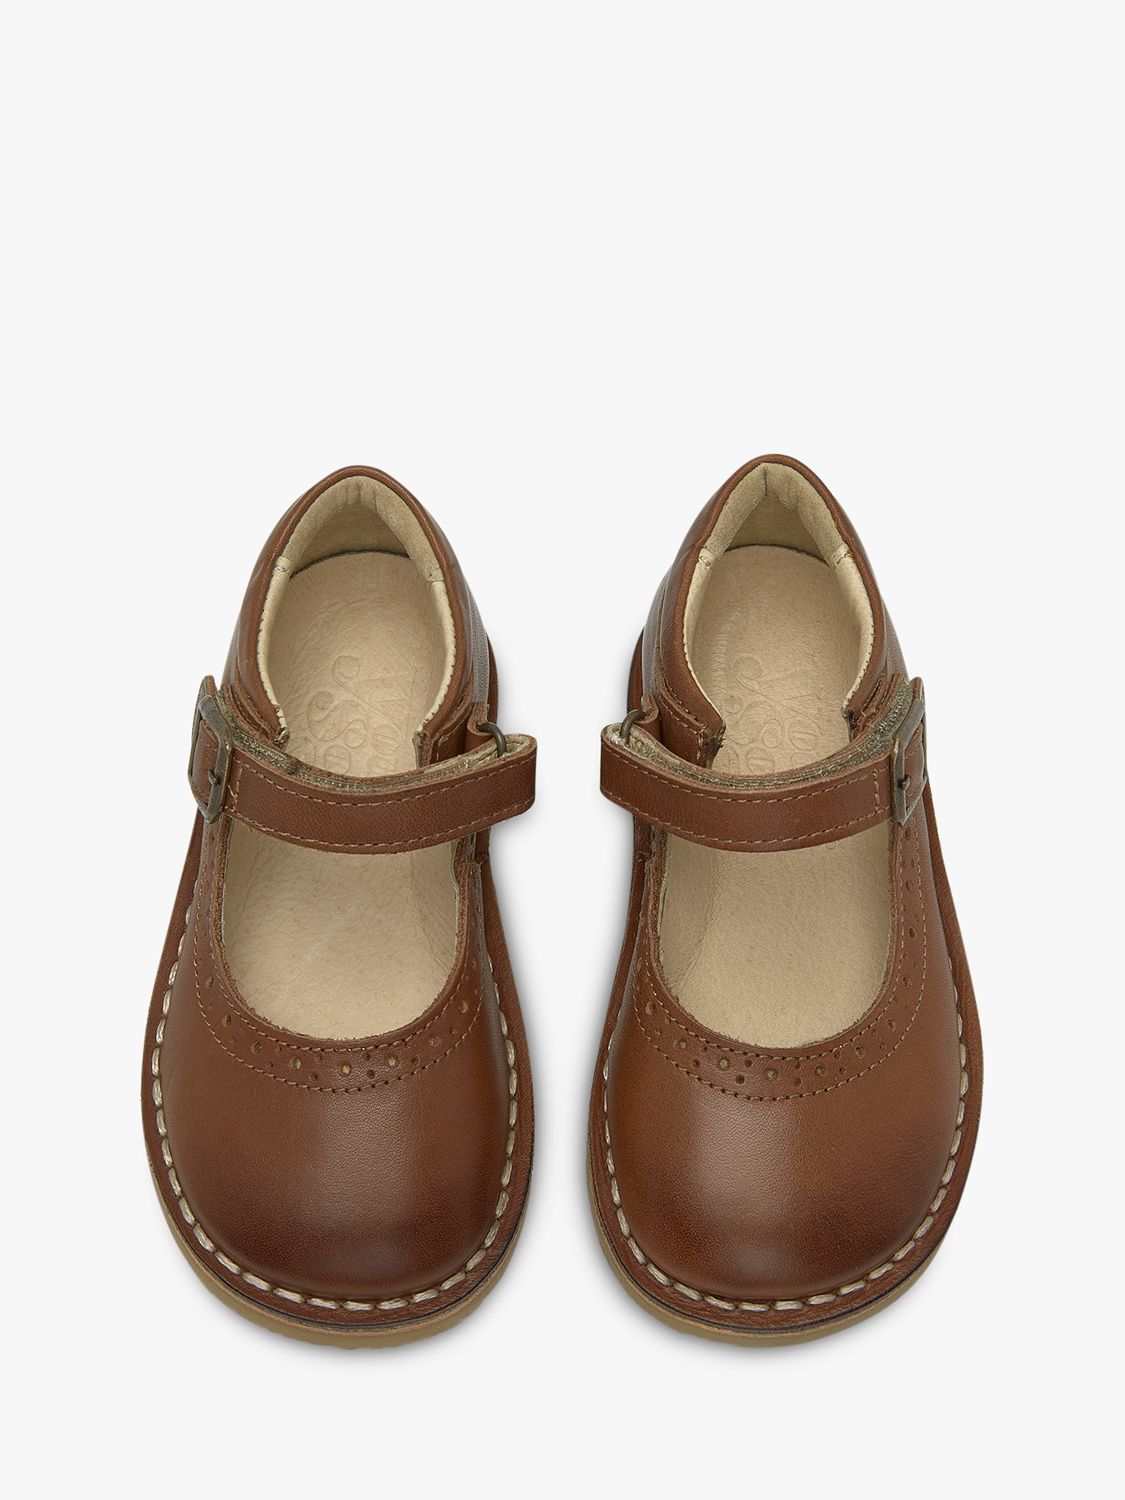 Young Soles Kids' Martha Leather Mary Jane Shoes, Tan Burnished, 5.5 Jnr